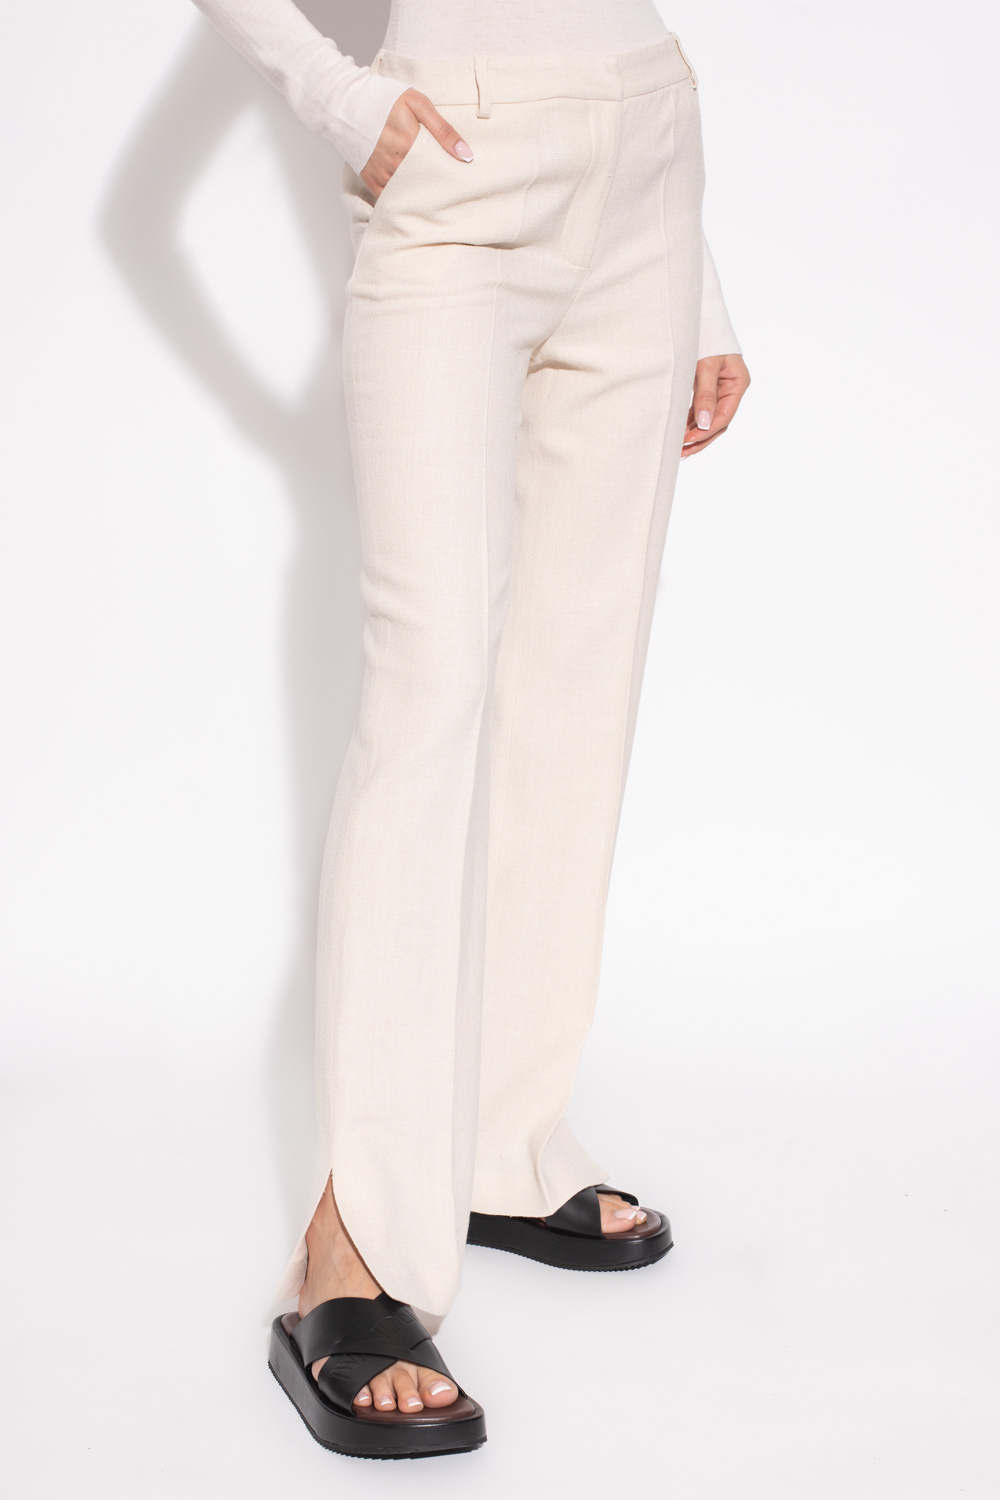 Etro Pleat-front Pack trousers